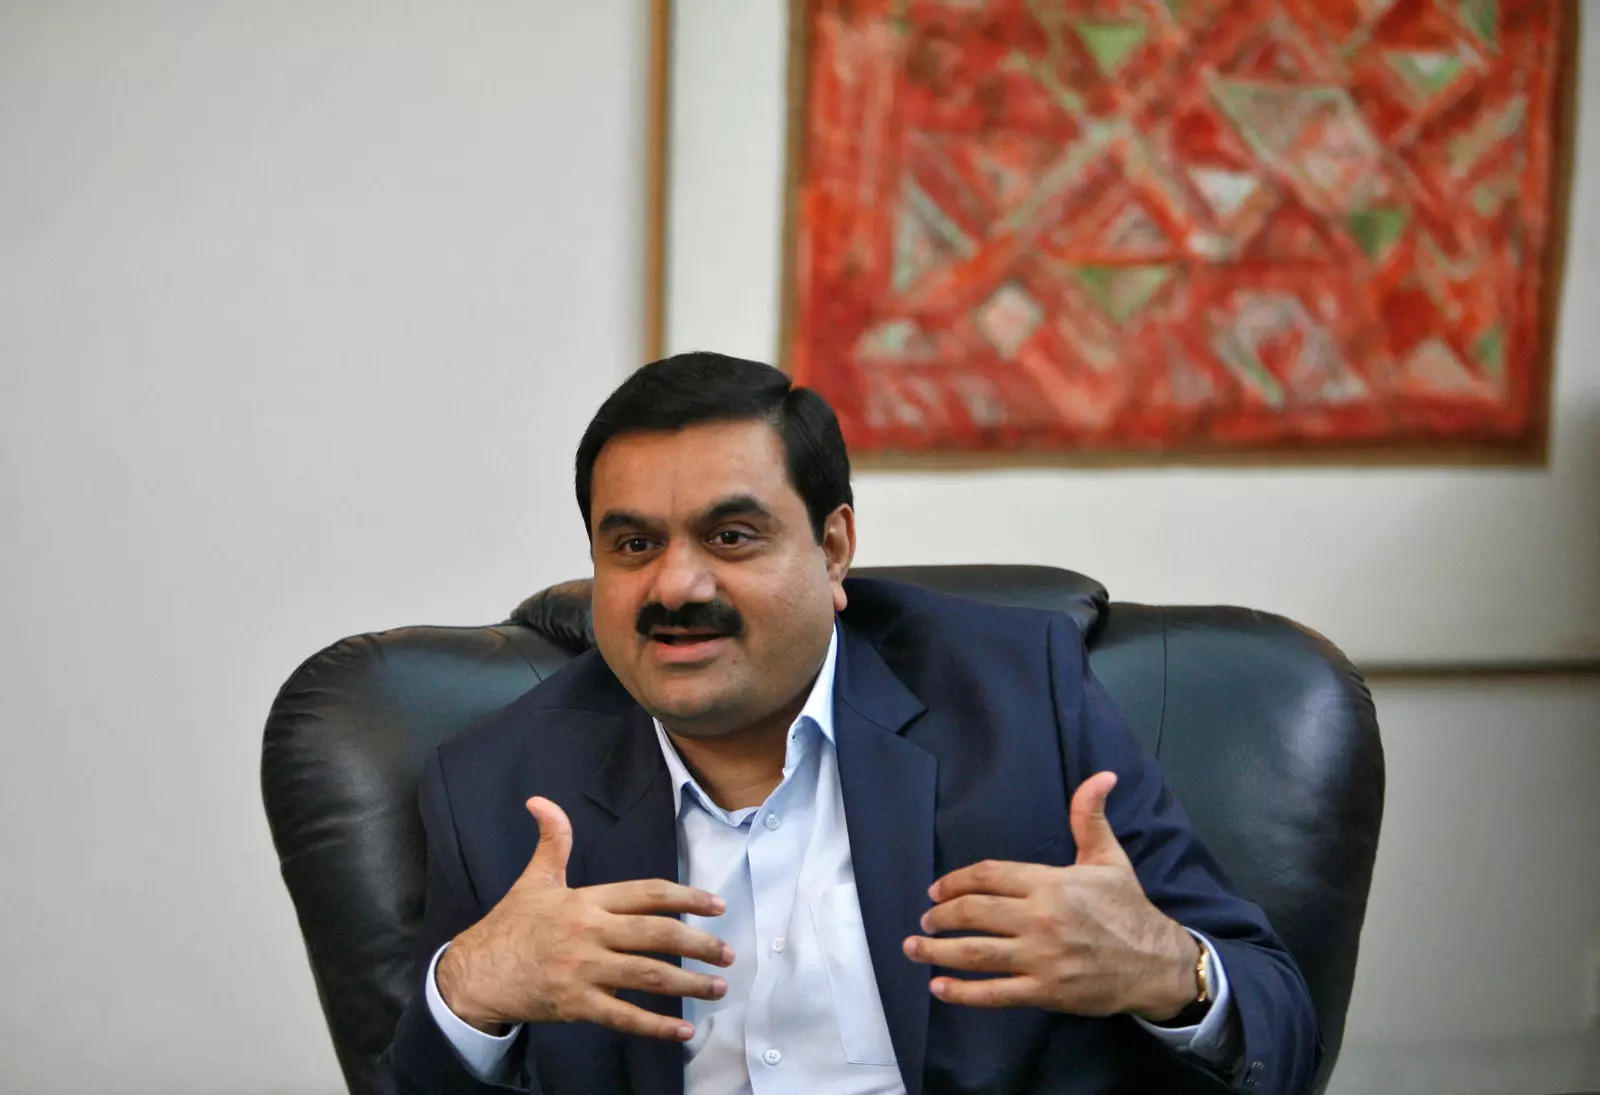 Adani loses $34 billion in 3 days, falling from fourth to eleventh on Bloomberg Billionaires Index